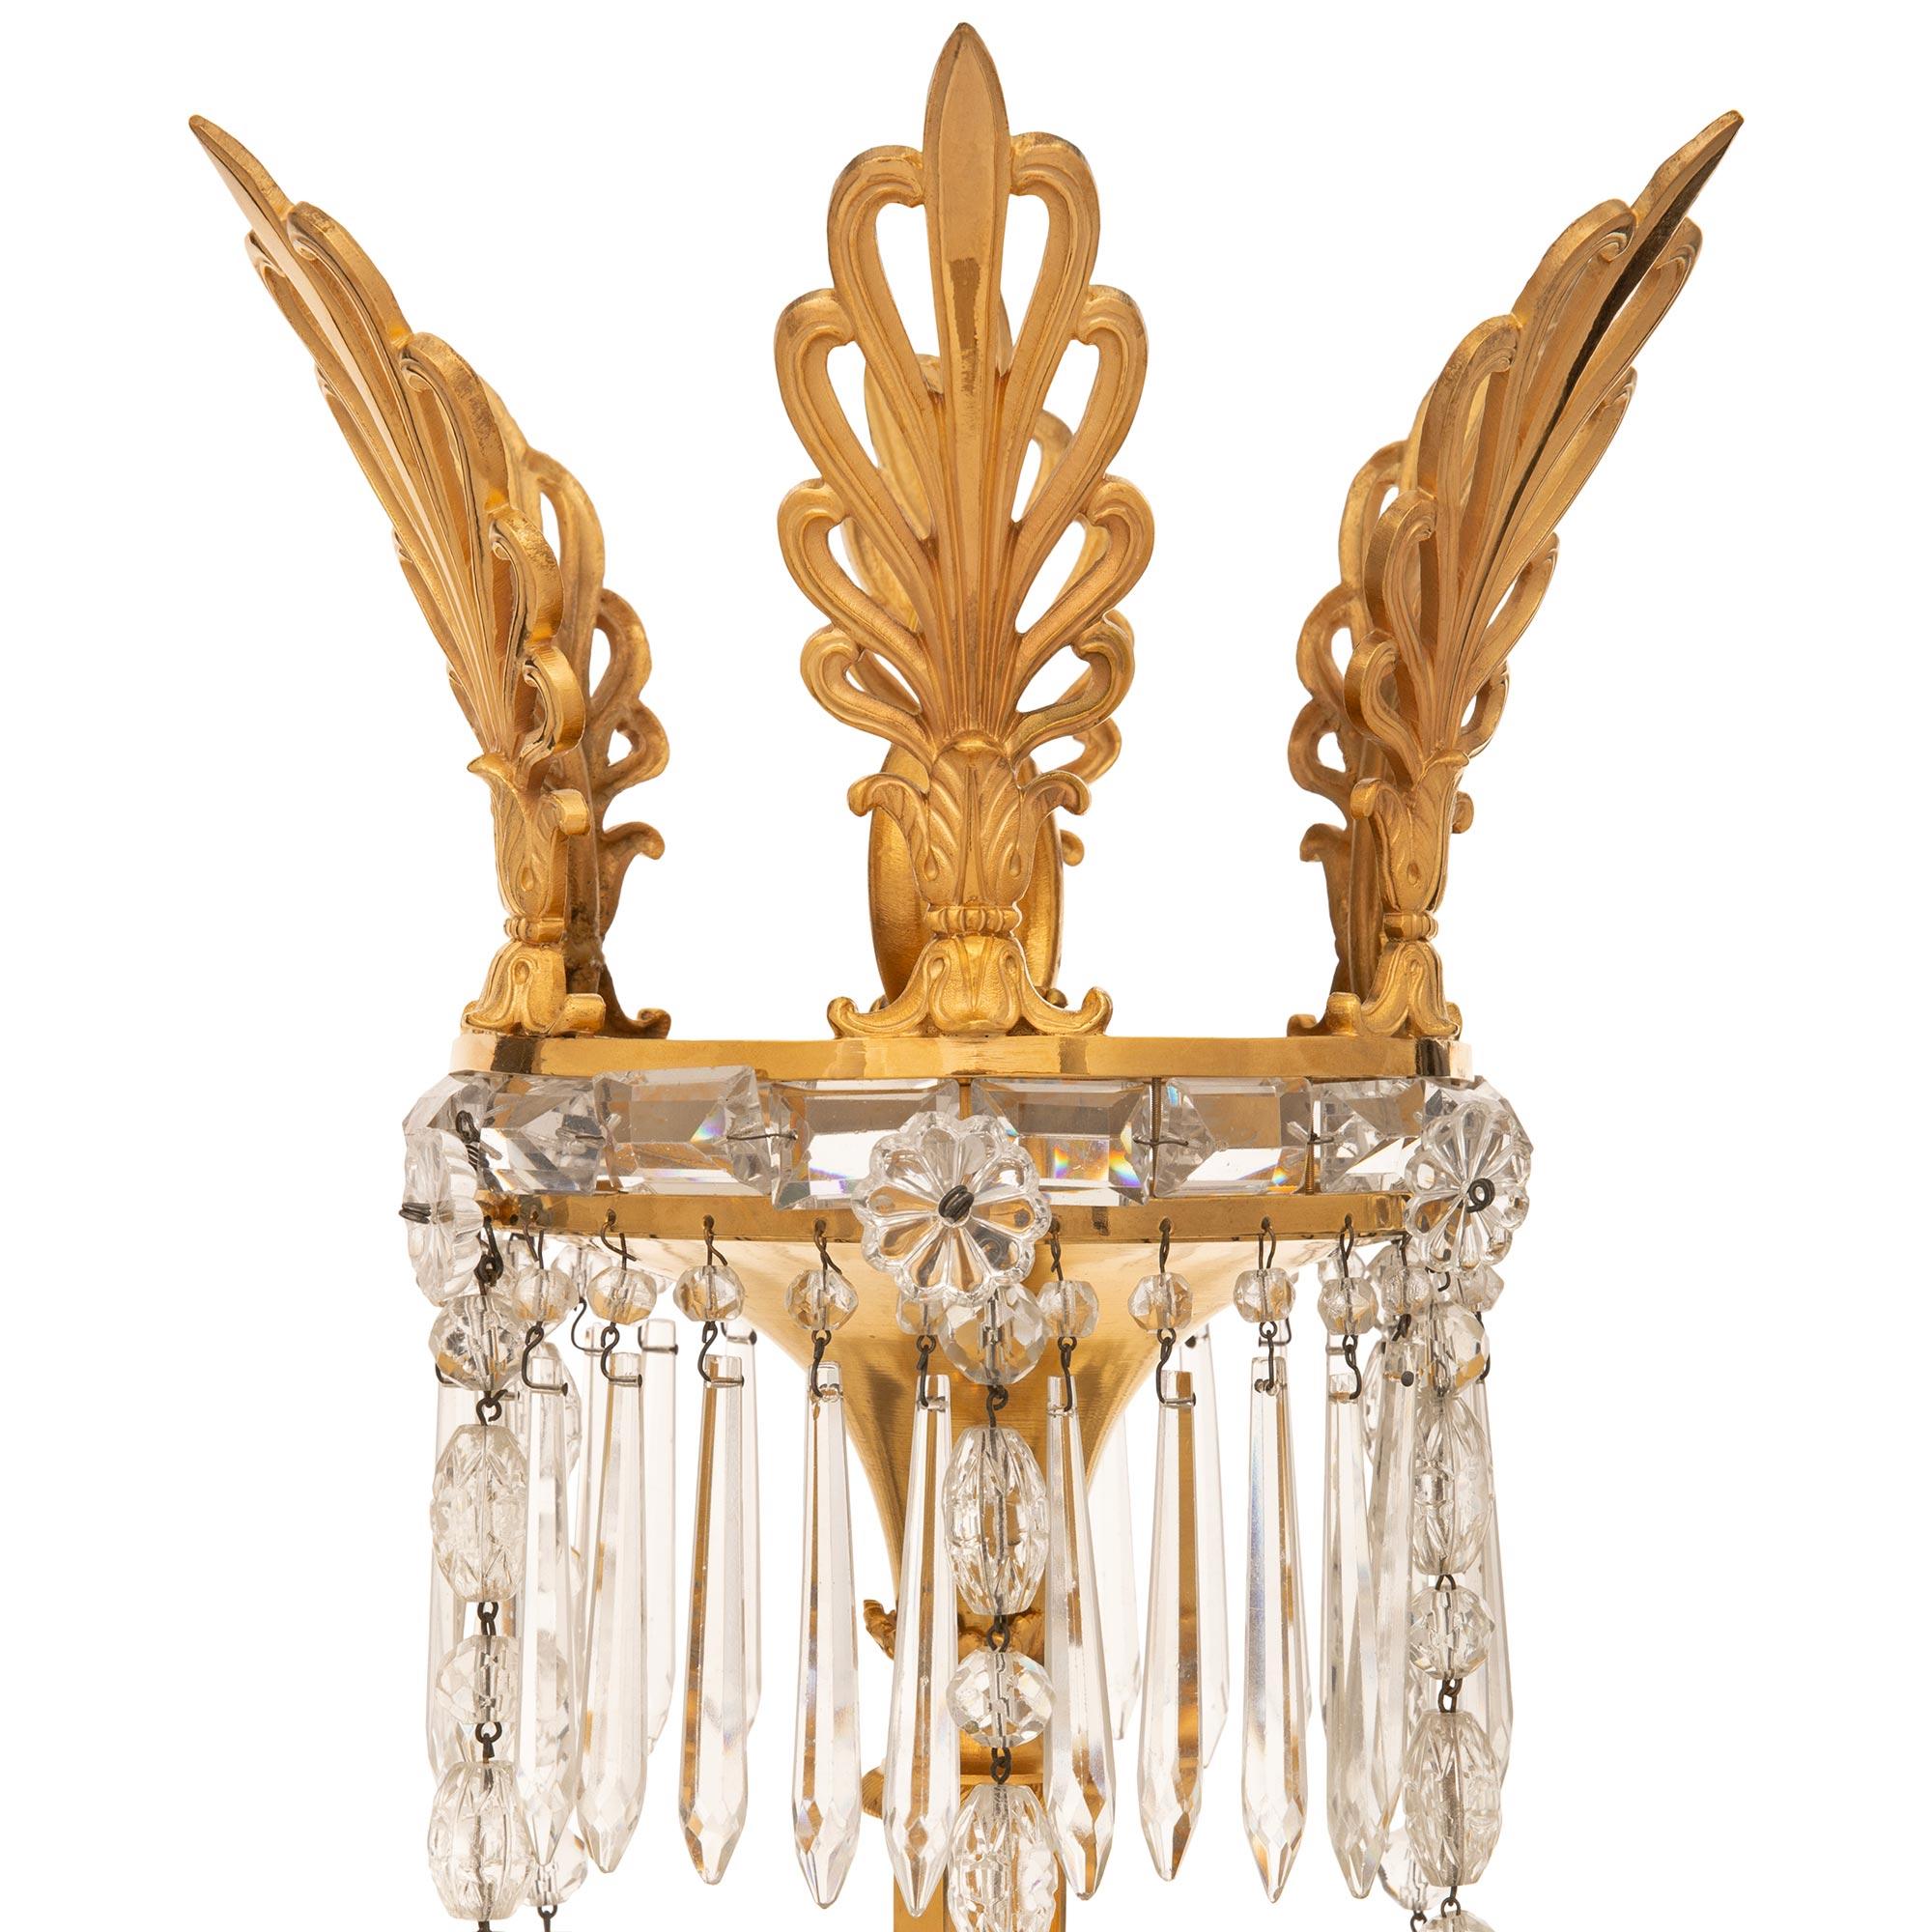 Enameled Russian 19th c. Neo-Classical St. Crystal, Ormolu, Bronze & Glass Chandelier For Sale